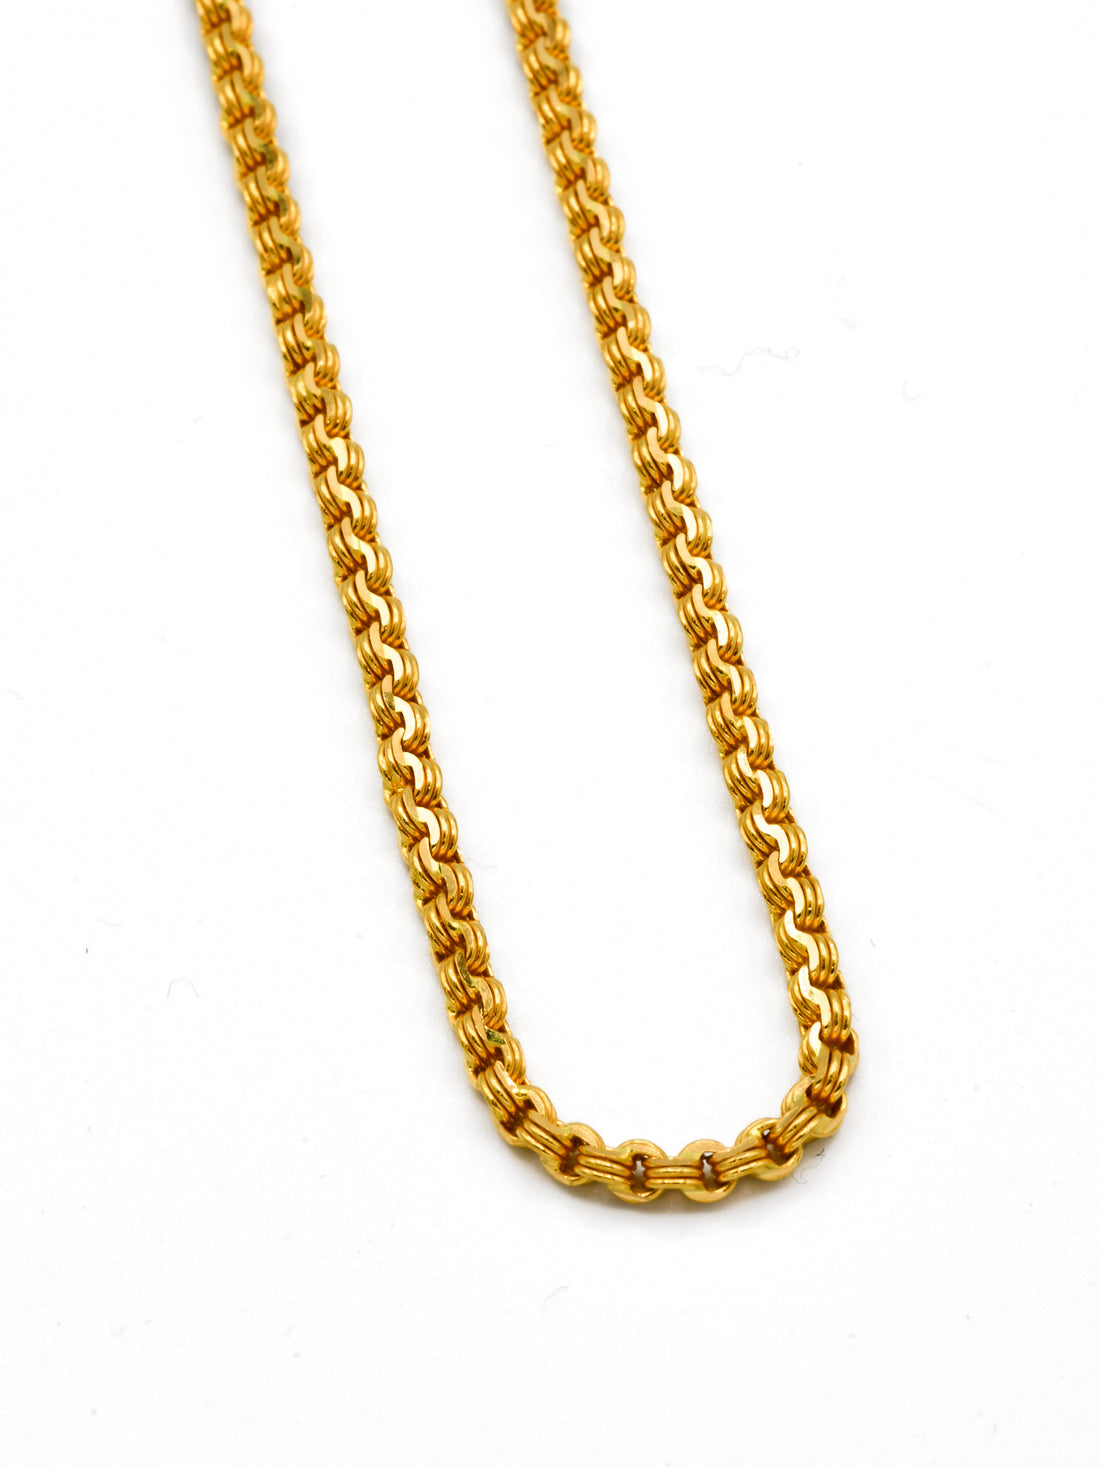 22ct Gold Chain - 55 cm - Roop Darshan